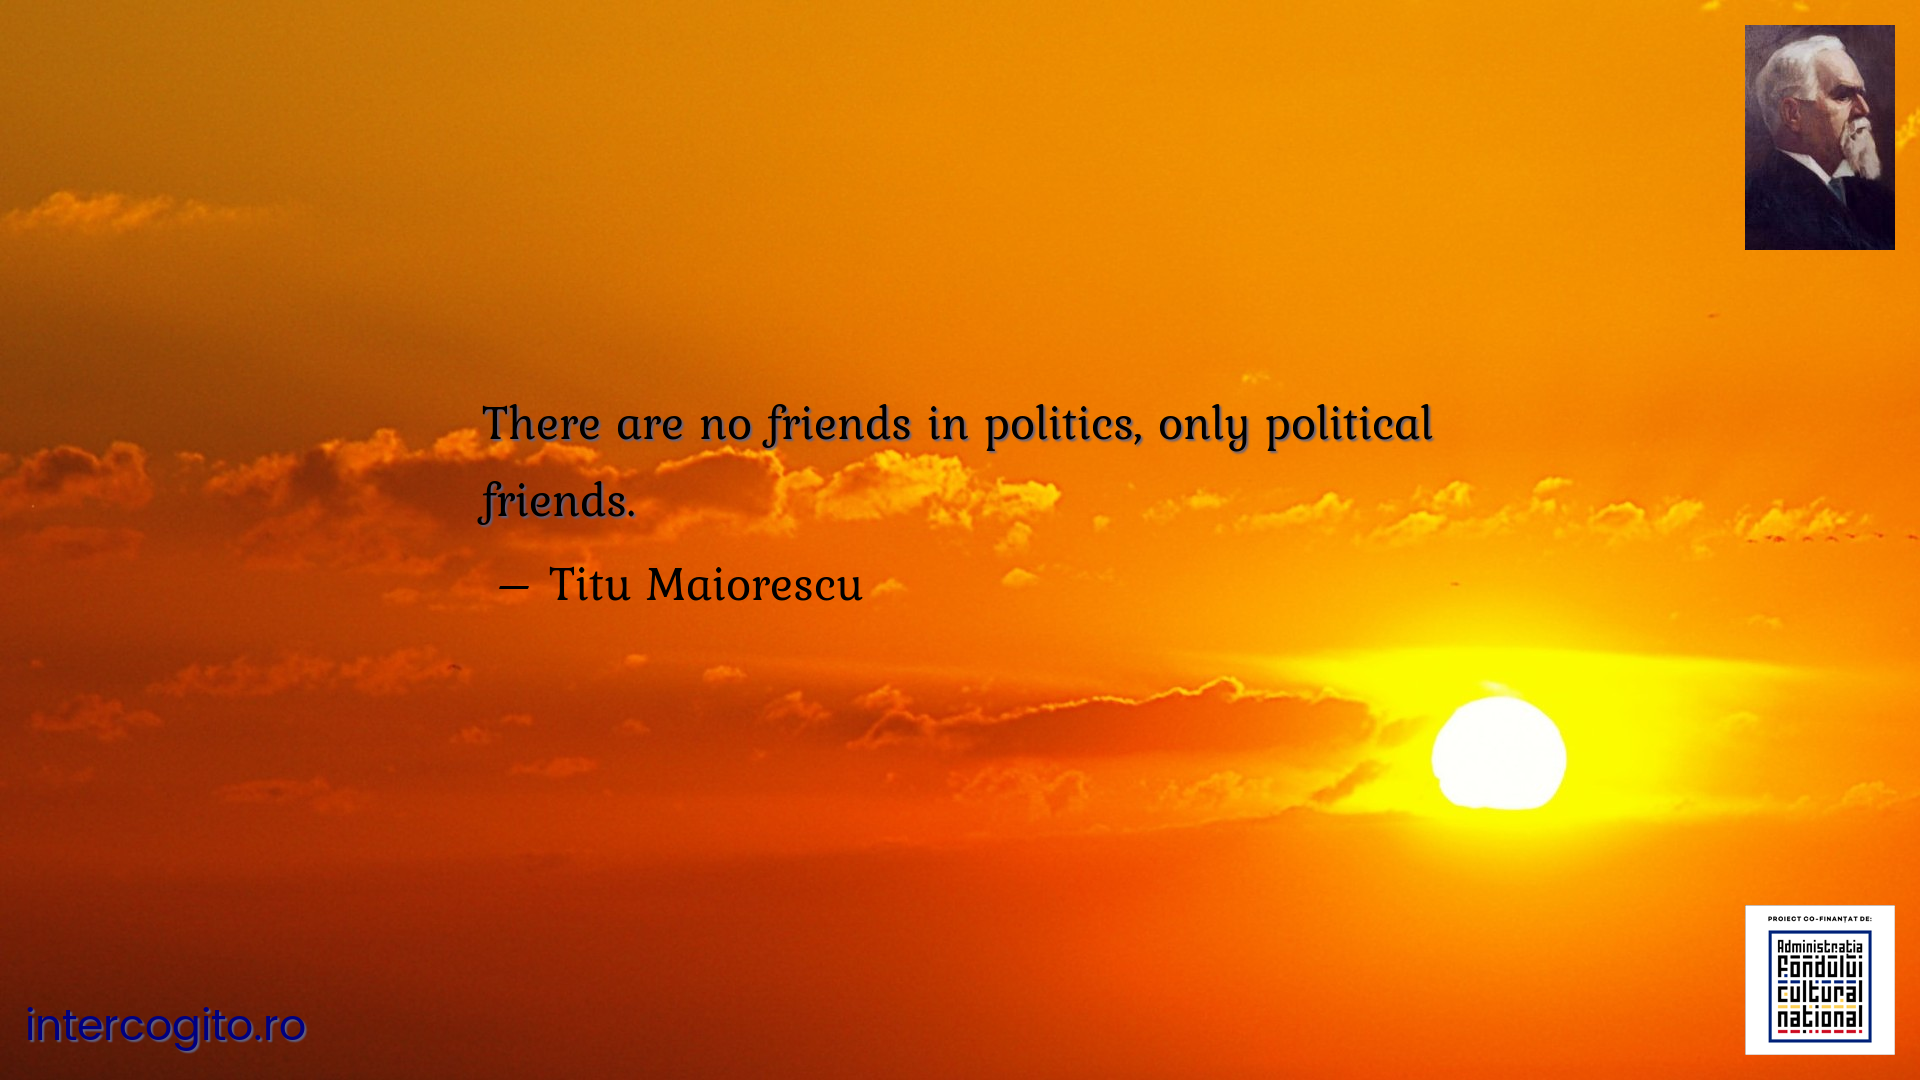 There are no friends in politics, only political friends.